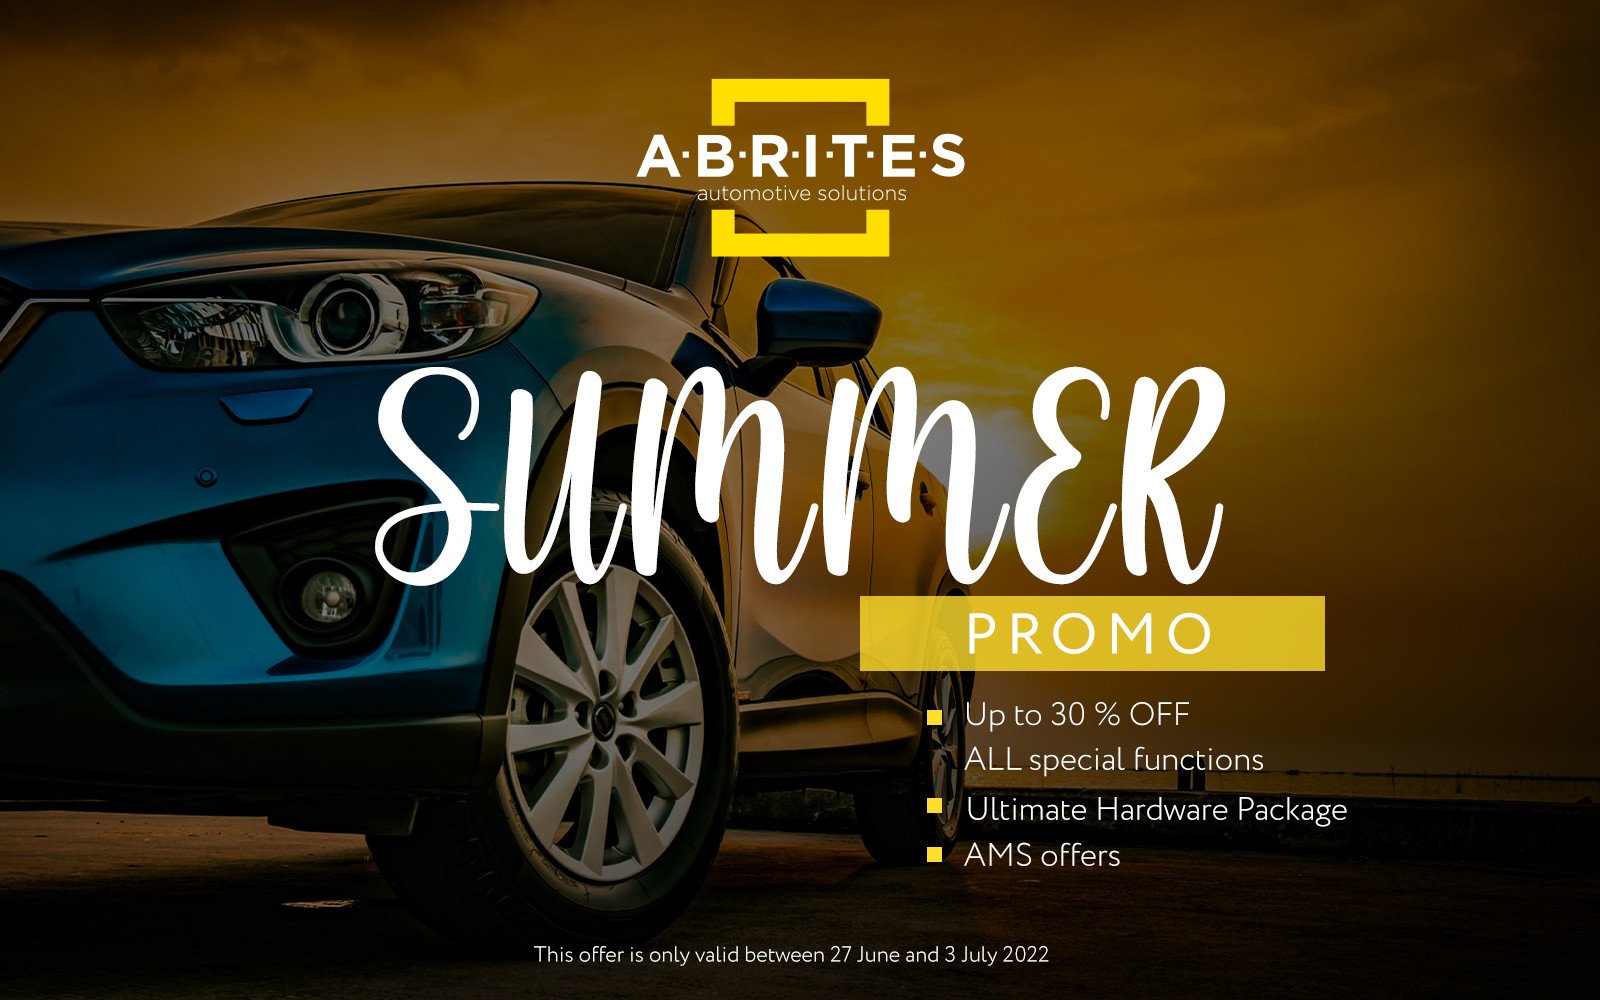 ABRITES SUMMER PROMO IS HERE!